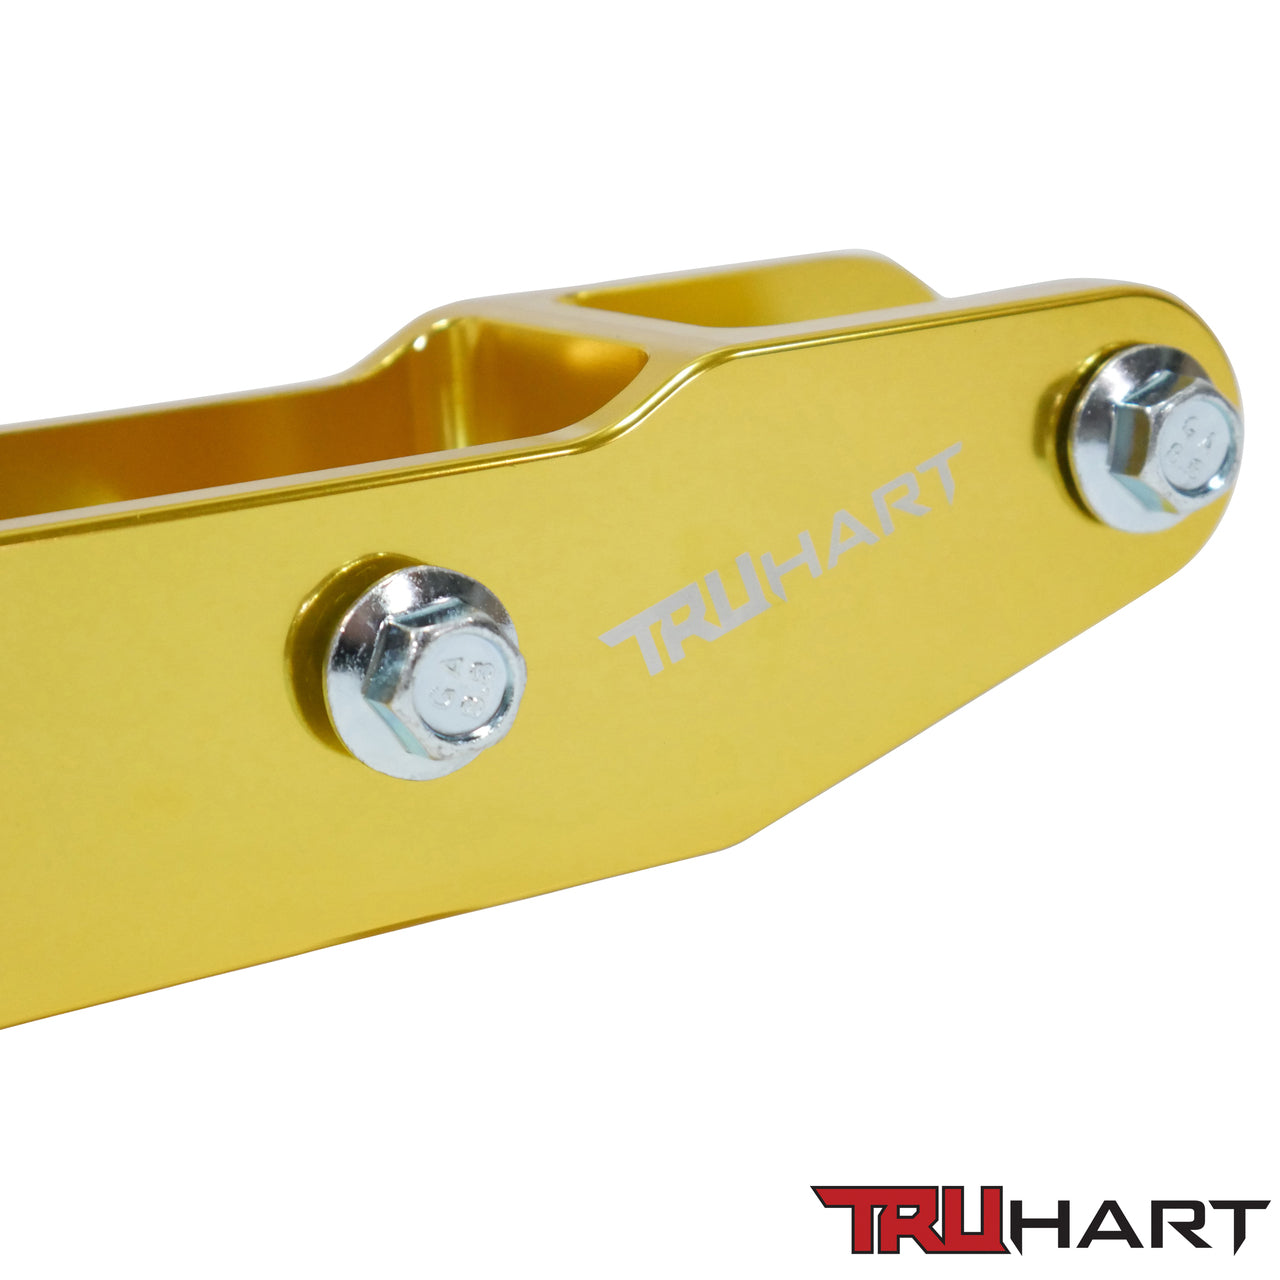 TruHart Rear Lower Control Arms (Adjustable), Anodized Gold - Multiple Fitment - TH-S108-GO